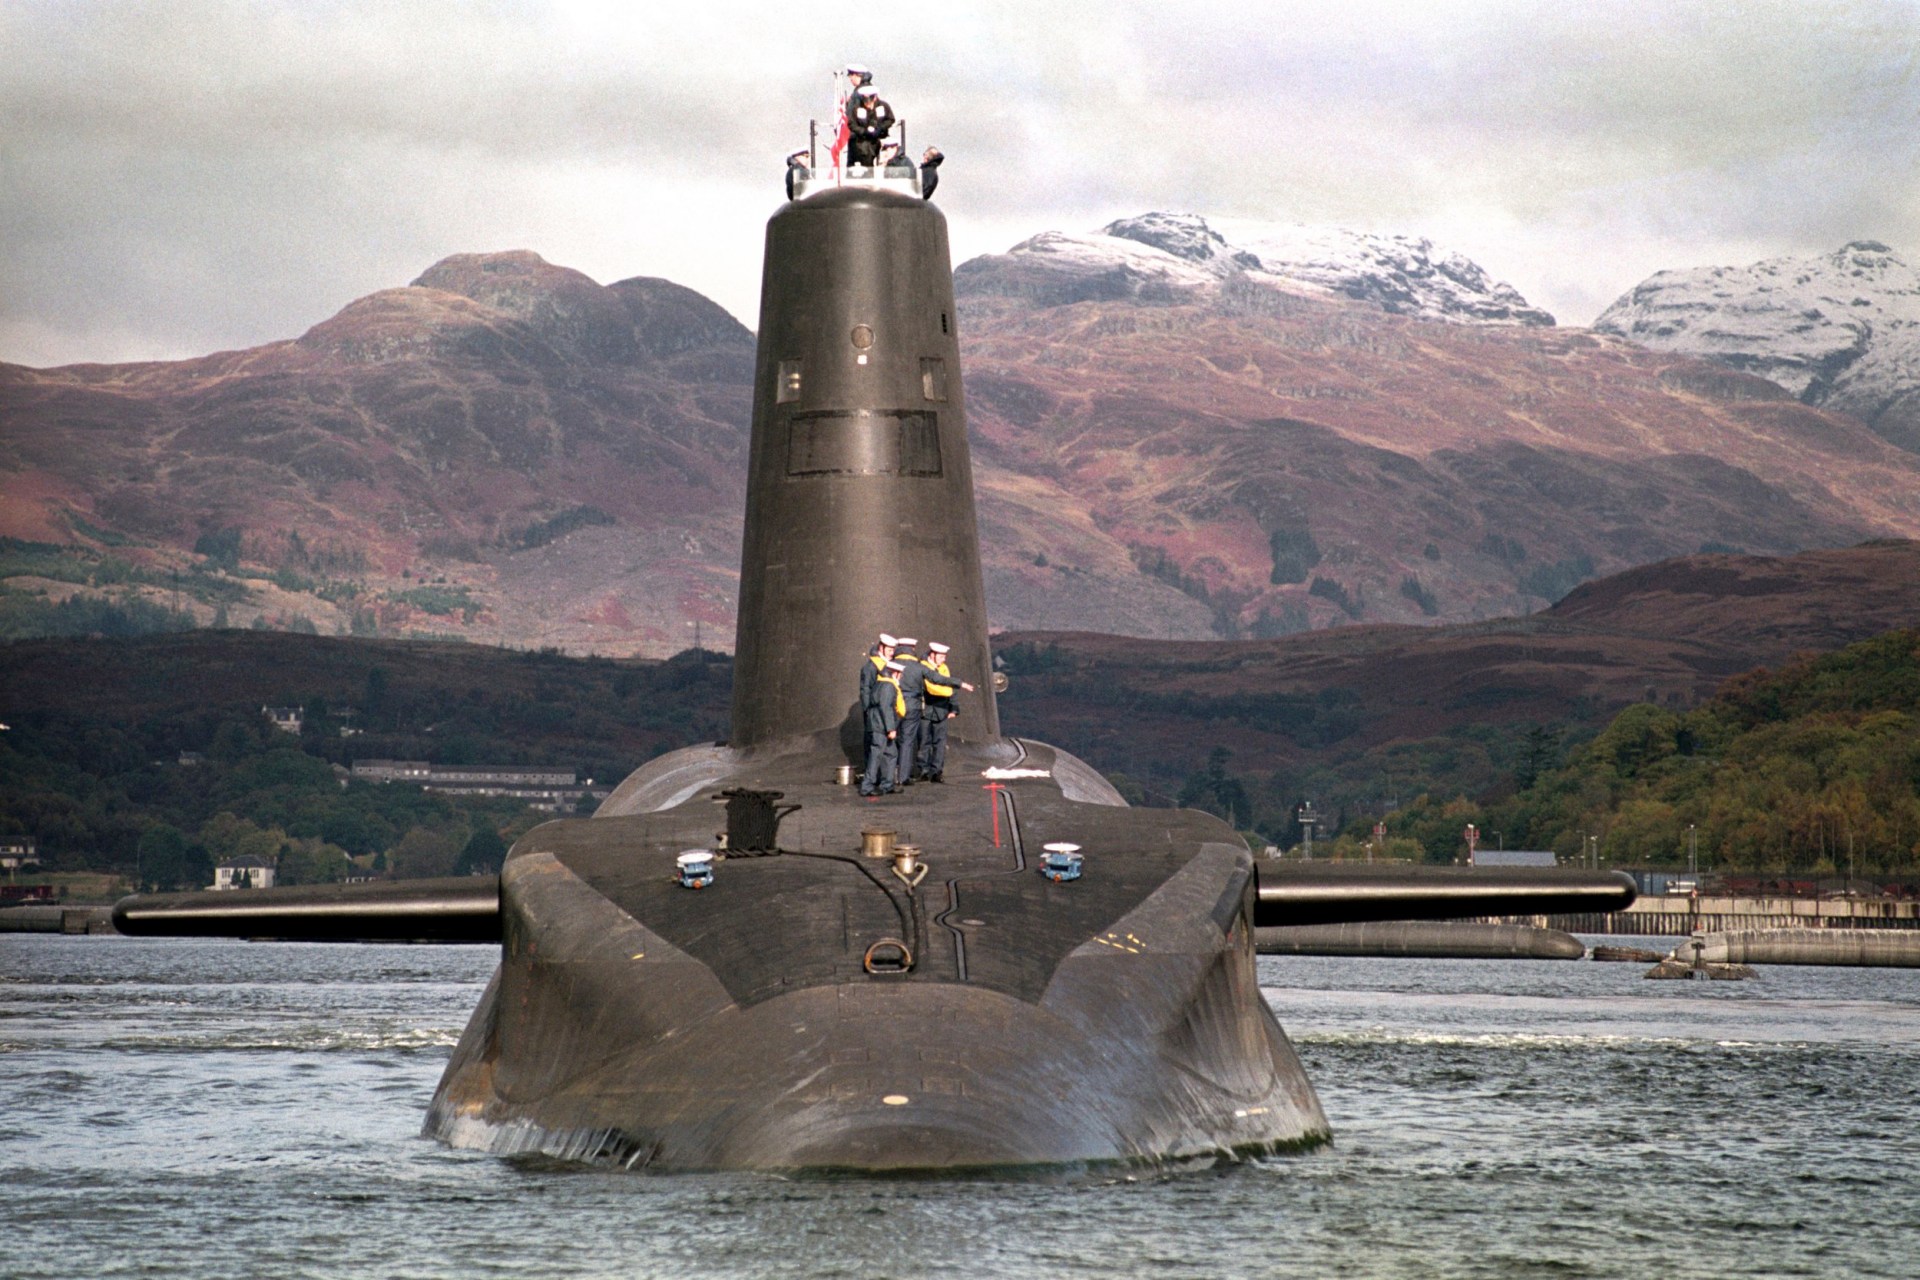 uk nuclear missile test fails - again - after trident missile belly flops into ocean